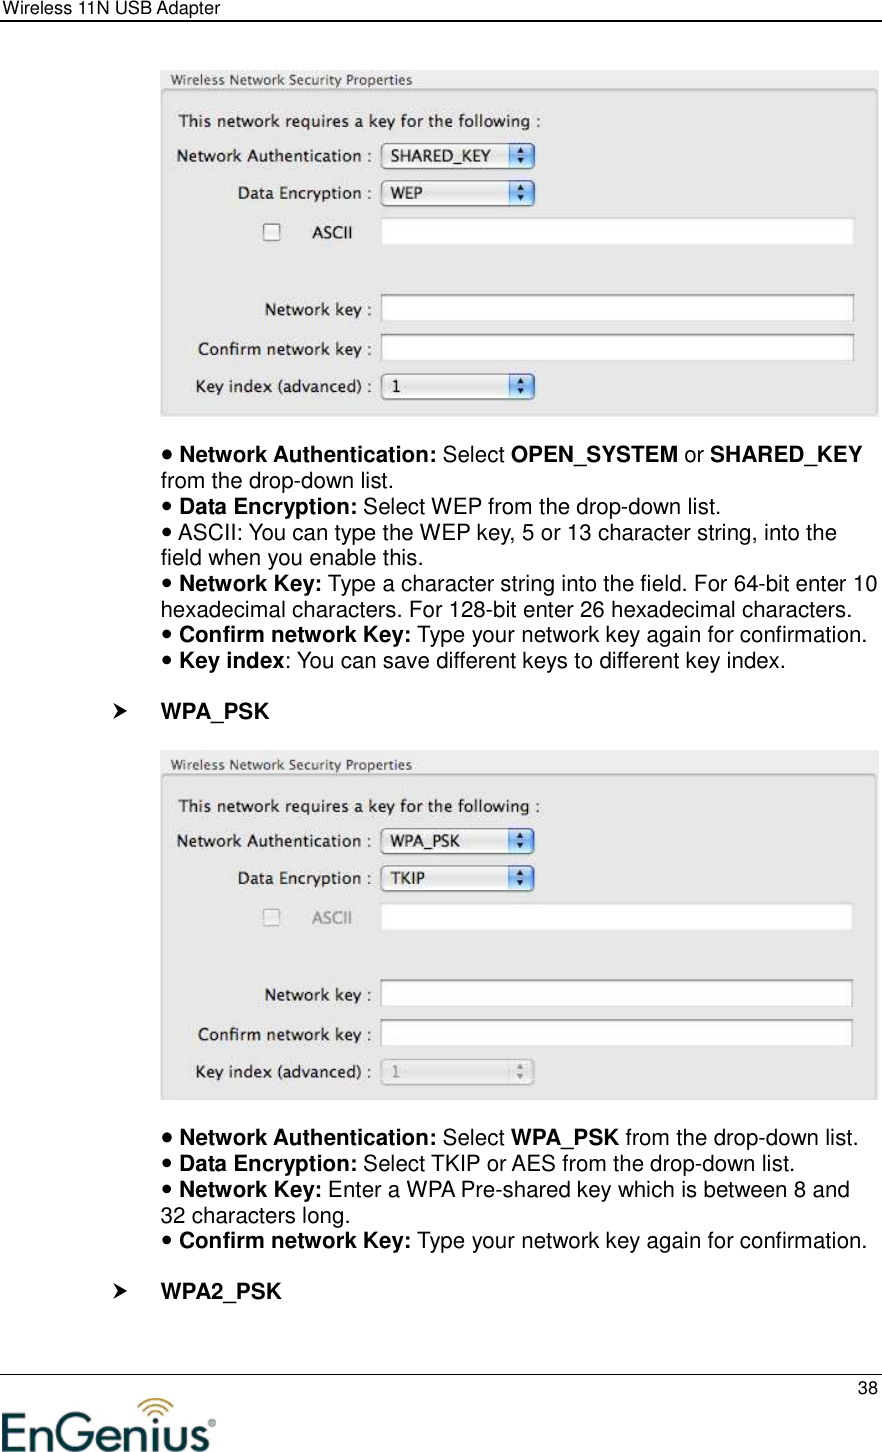 Wireless 11N USB Adapter  38     Network Authentication: Select OPEN_SYSTEM or SHARED_KEY from the drop-down list.   Data Encryption: Select WEP from the drop-down list.   ASCII: You can type the WEP key, 5 or 13 character string, into the field when you enable this.  Network Key: Type a character string into the field. For 64-bit enter 10 hexadecimal characters. For 128-bit enter 26 hexadecimal characters.   Confirm network Key: Type your network key again for confirmation.  Key index: You can save different keys to different key index.   WPA_PSK     Network Authentication: Select WPA_PSK from the drop-down list.   Data Encryption: Select TKIP or AES from the drop-down list.   Network Key: Enter a WPA Pre-shared key which is between 8 and 32 characters long.    Confirm network Key: Type your network key again for confirmation.   WPA2_PSK  